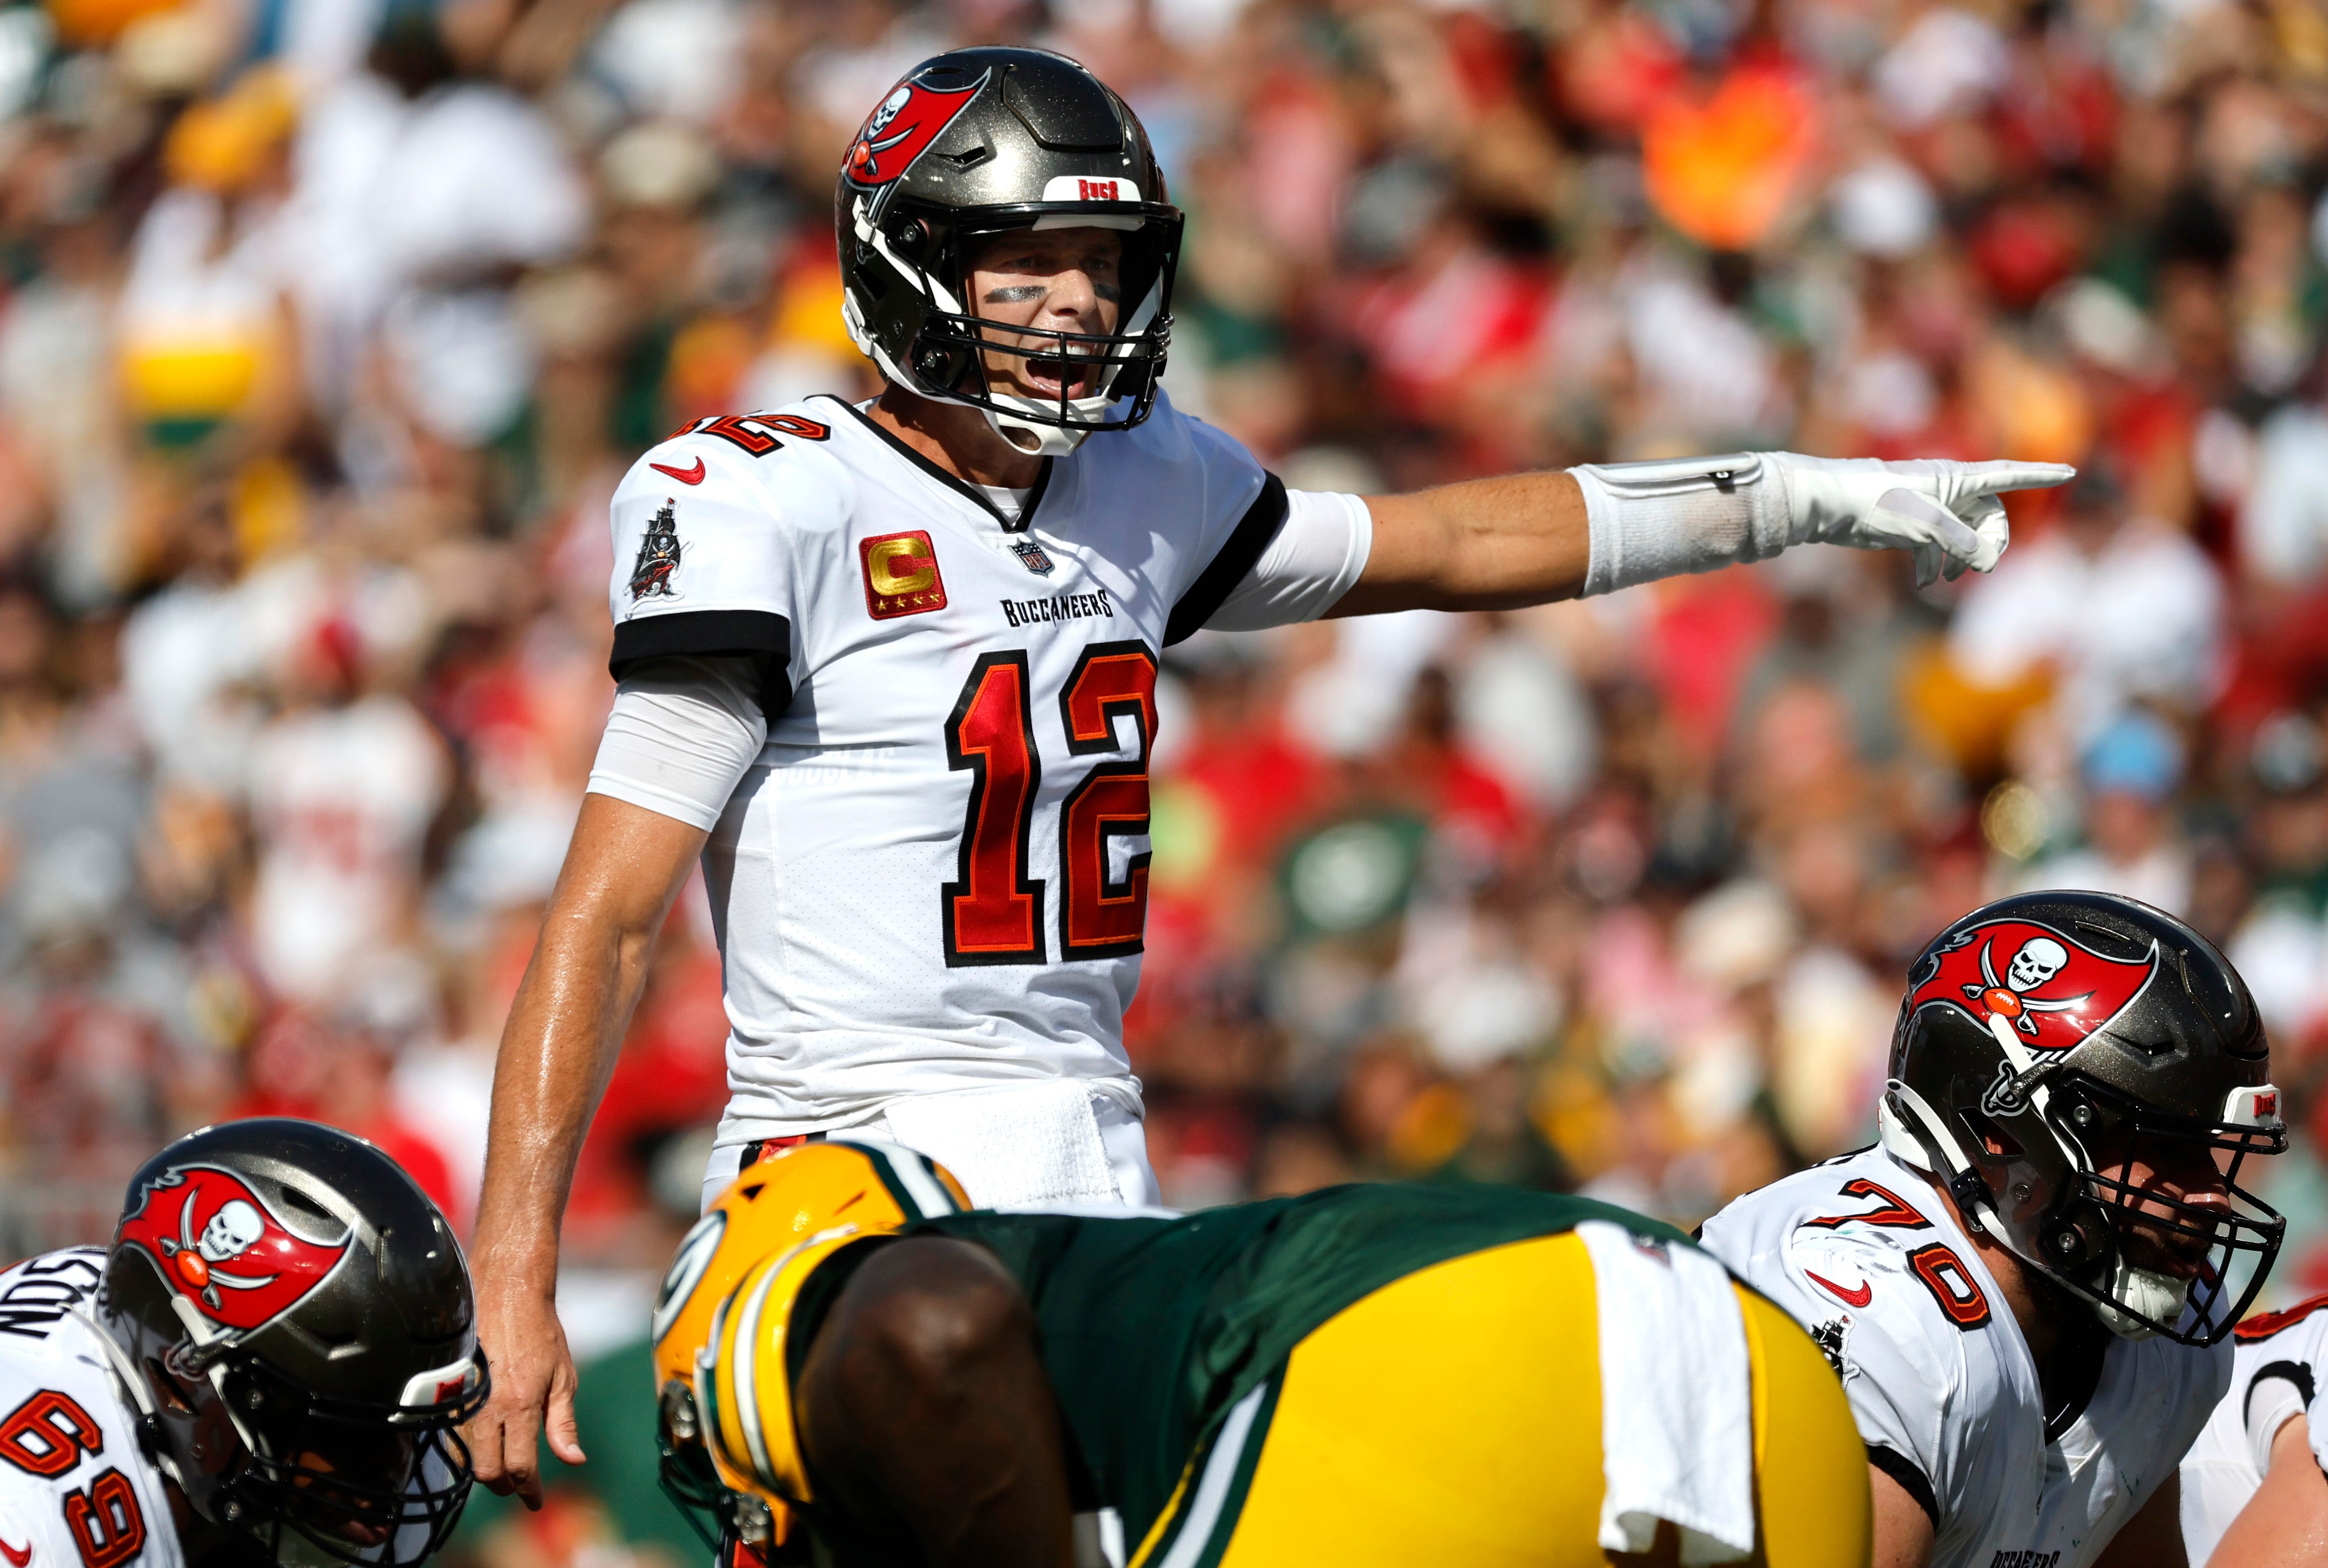 Tampa Bay Buccaneers quarterback Tom Brady (12) calls a play against the Green Bay Packers during the first quarter on Sept. 25, 2022, at Raymond James Stadium in Tampa, Florida.